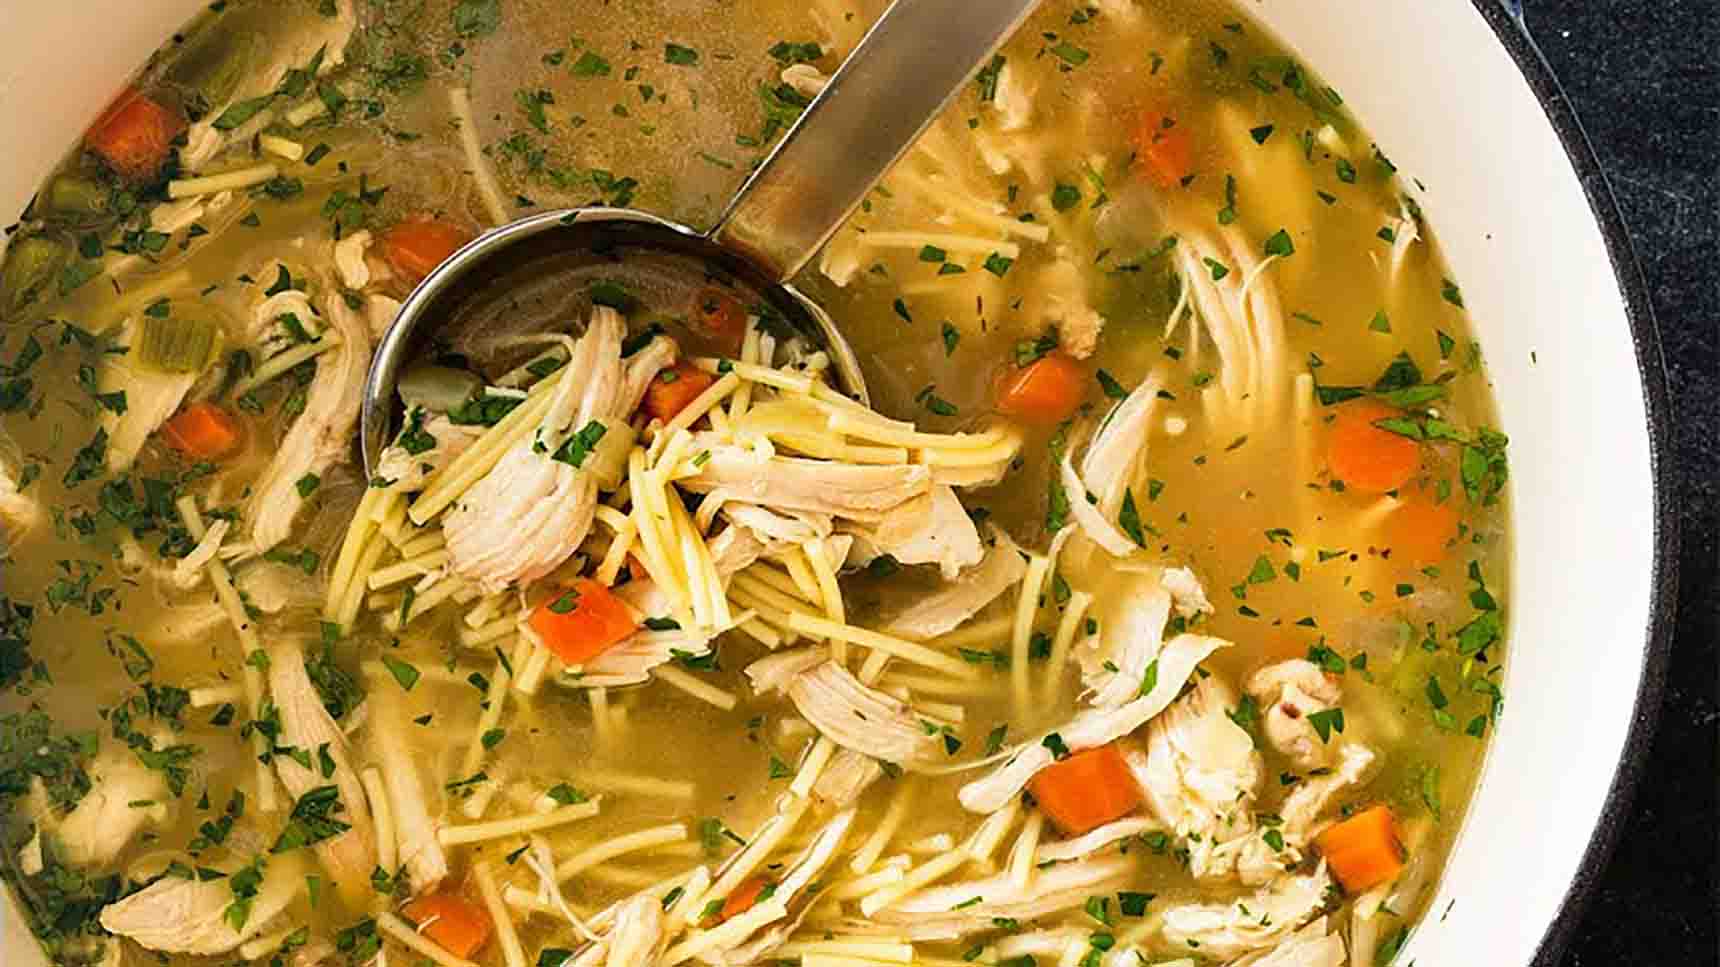 Homemade Chicken Noodle Soup [VIDEO] - The Recipe Rebel